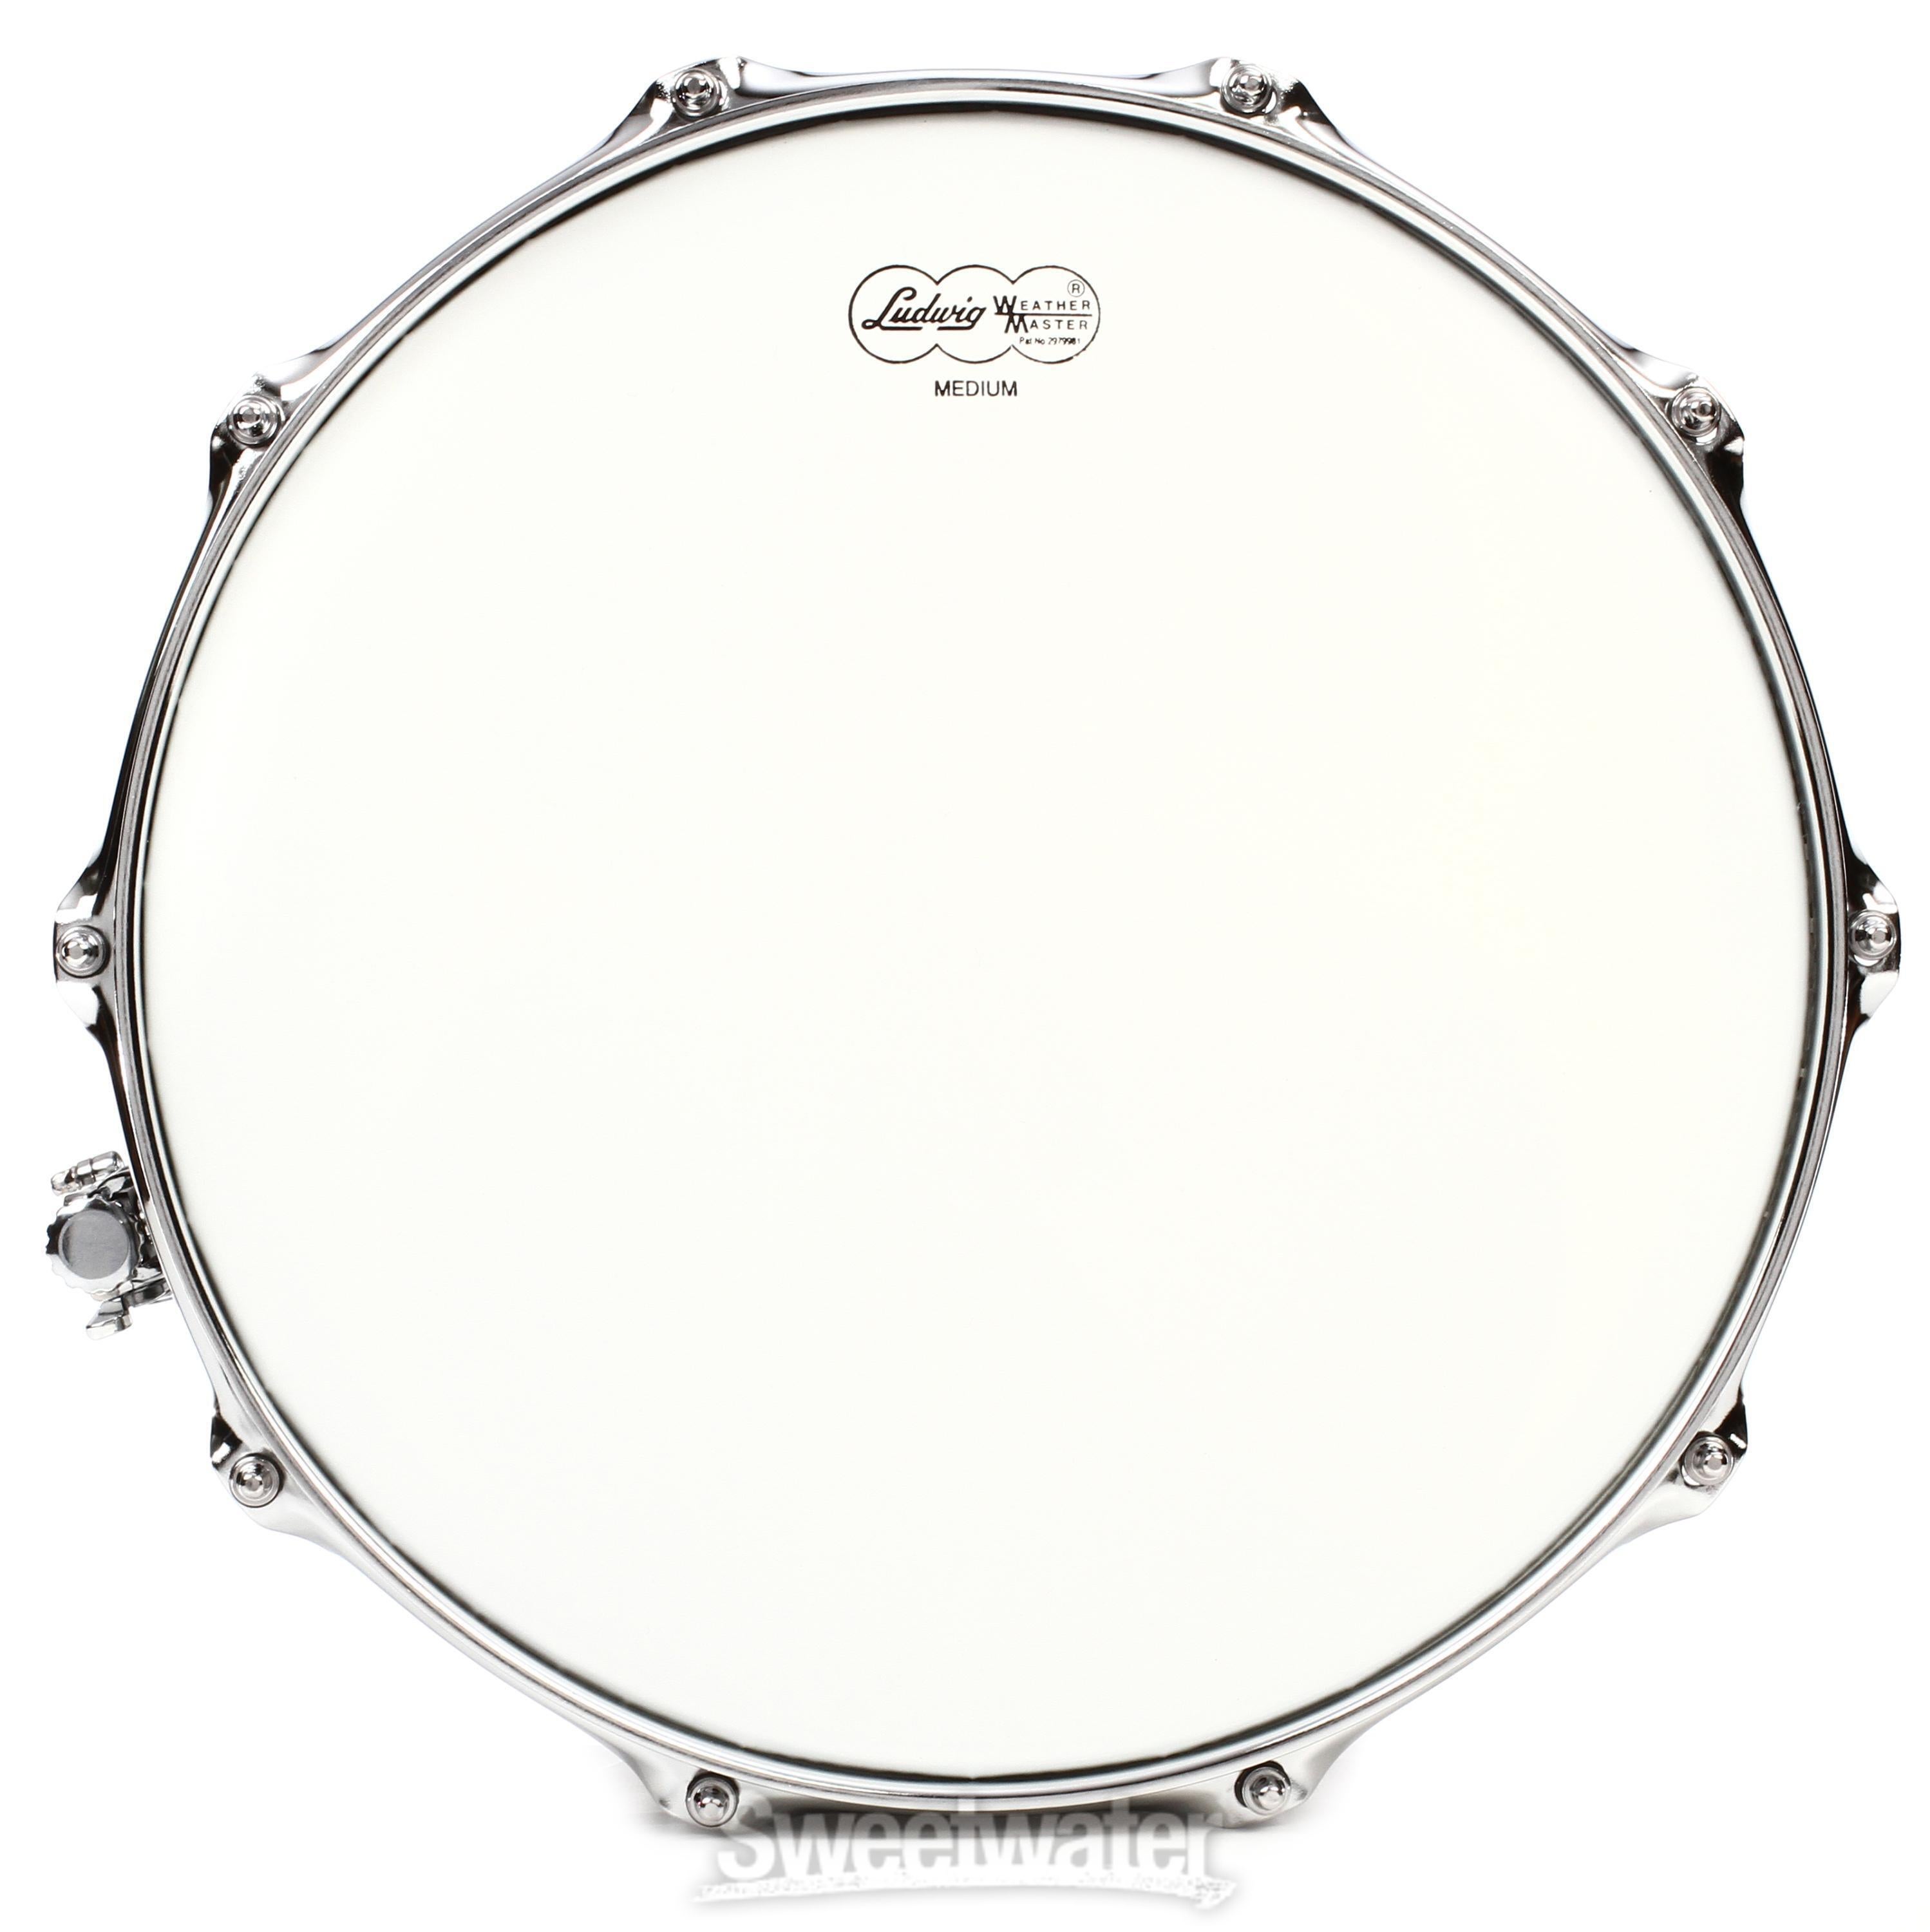 Ludwig Supraphonic LM402 6.5 x 14-inch Snare Drum - Chrome 